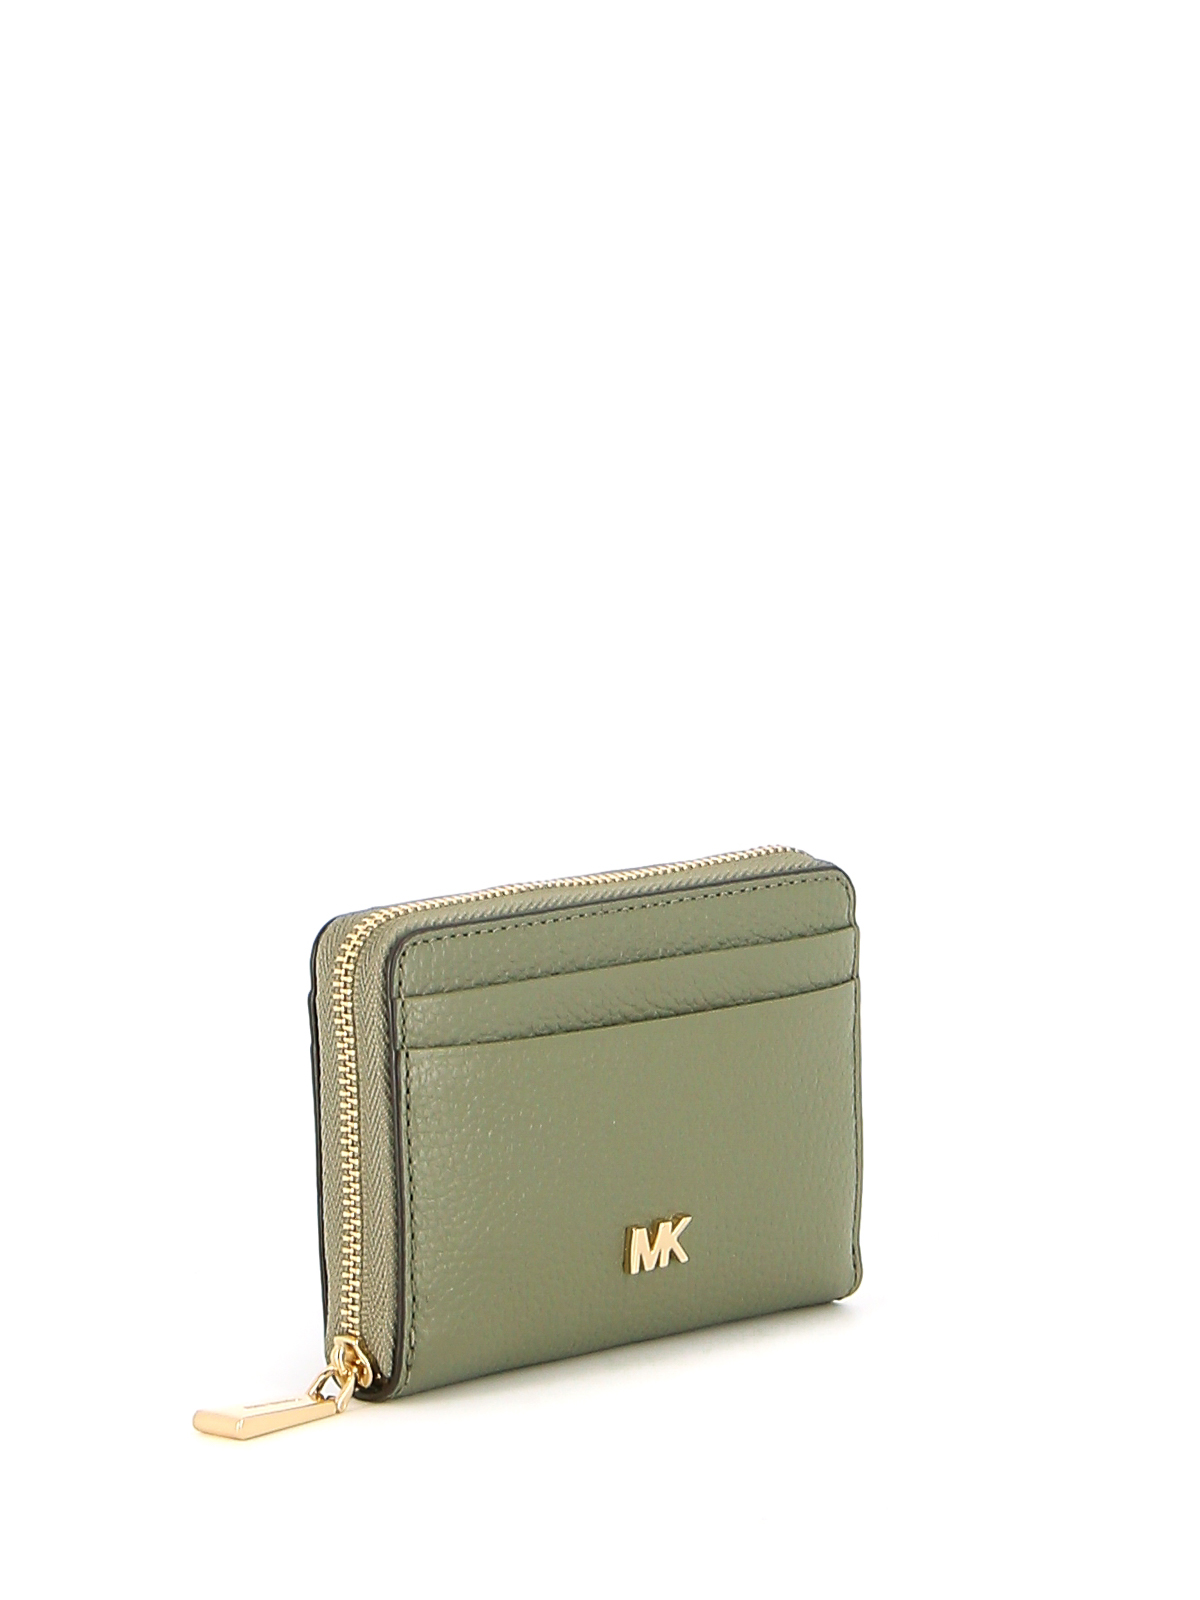 MICHAEL KORS SMALL WALLET  Shopee Philippines